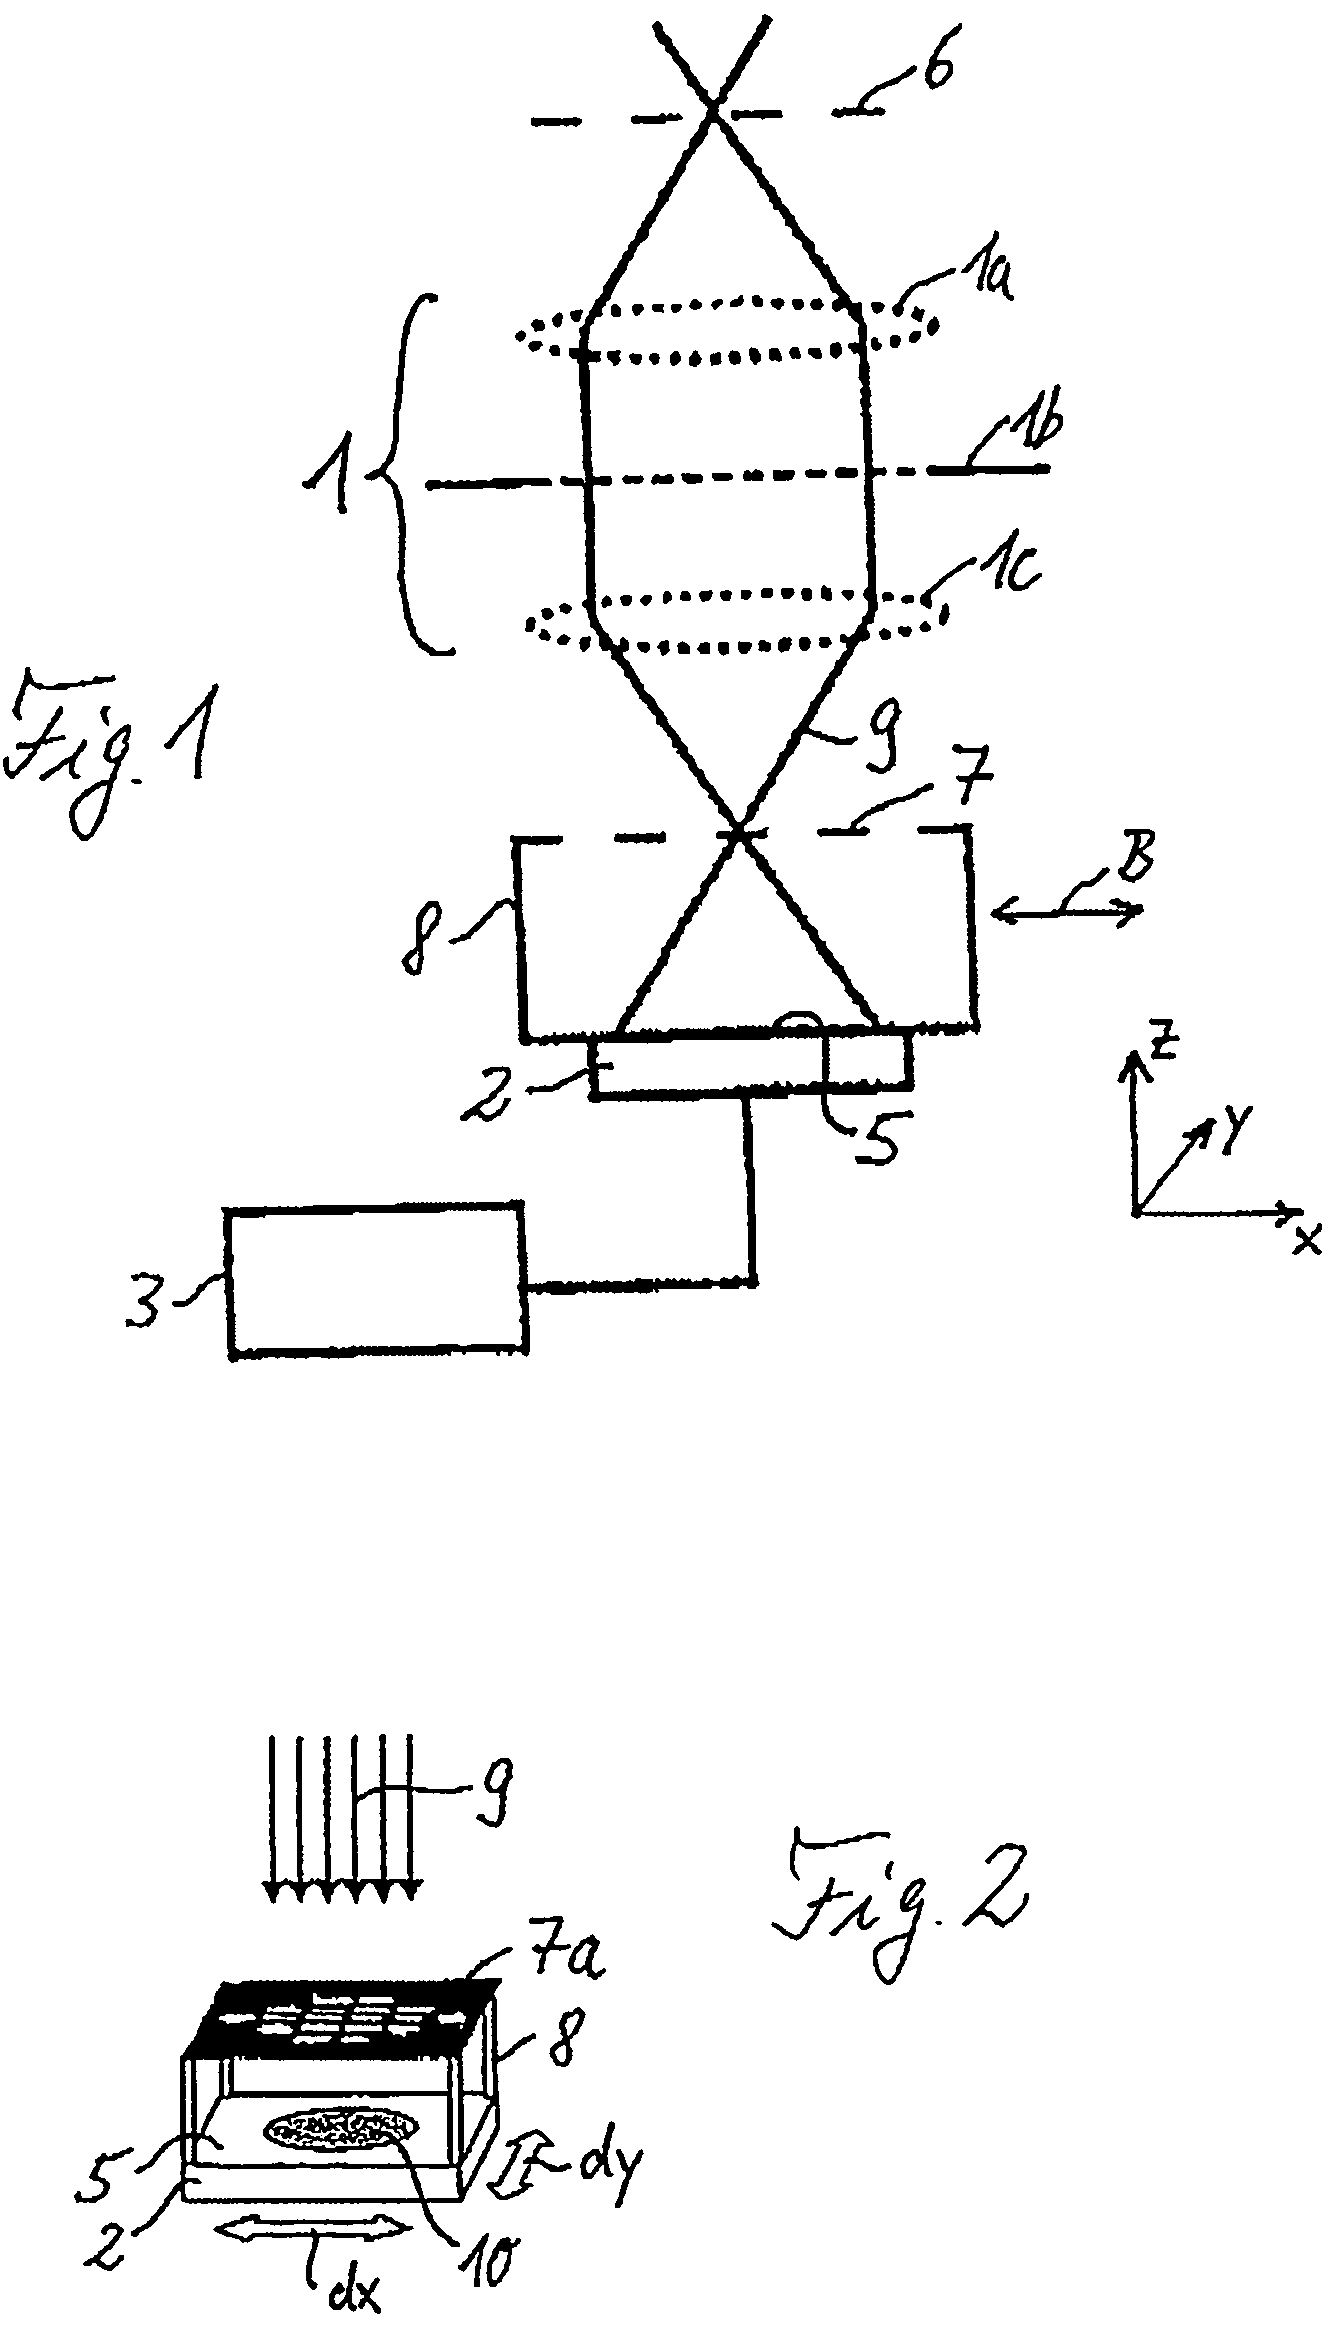 Device and method for wavefront measurement of an optical imaging system by means of phase-shifting interferometry